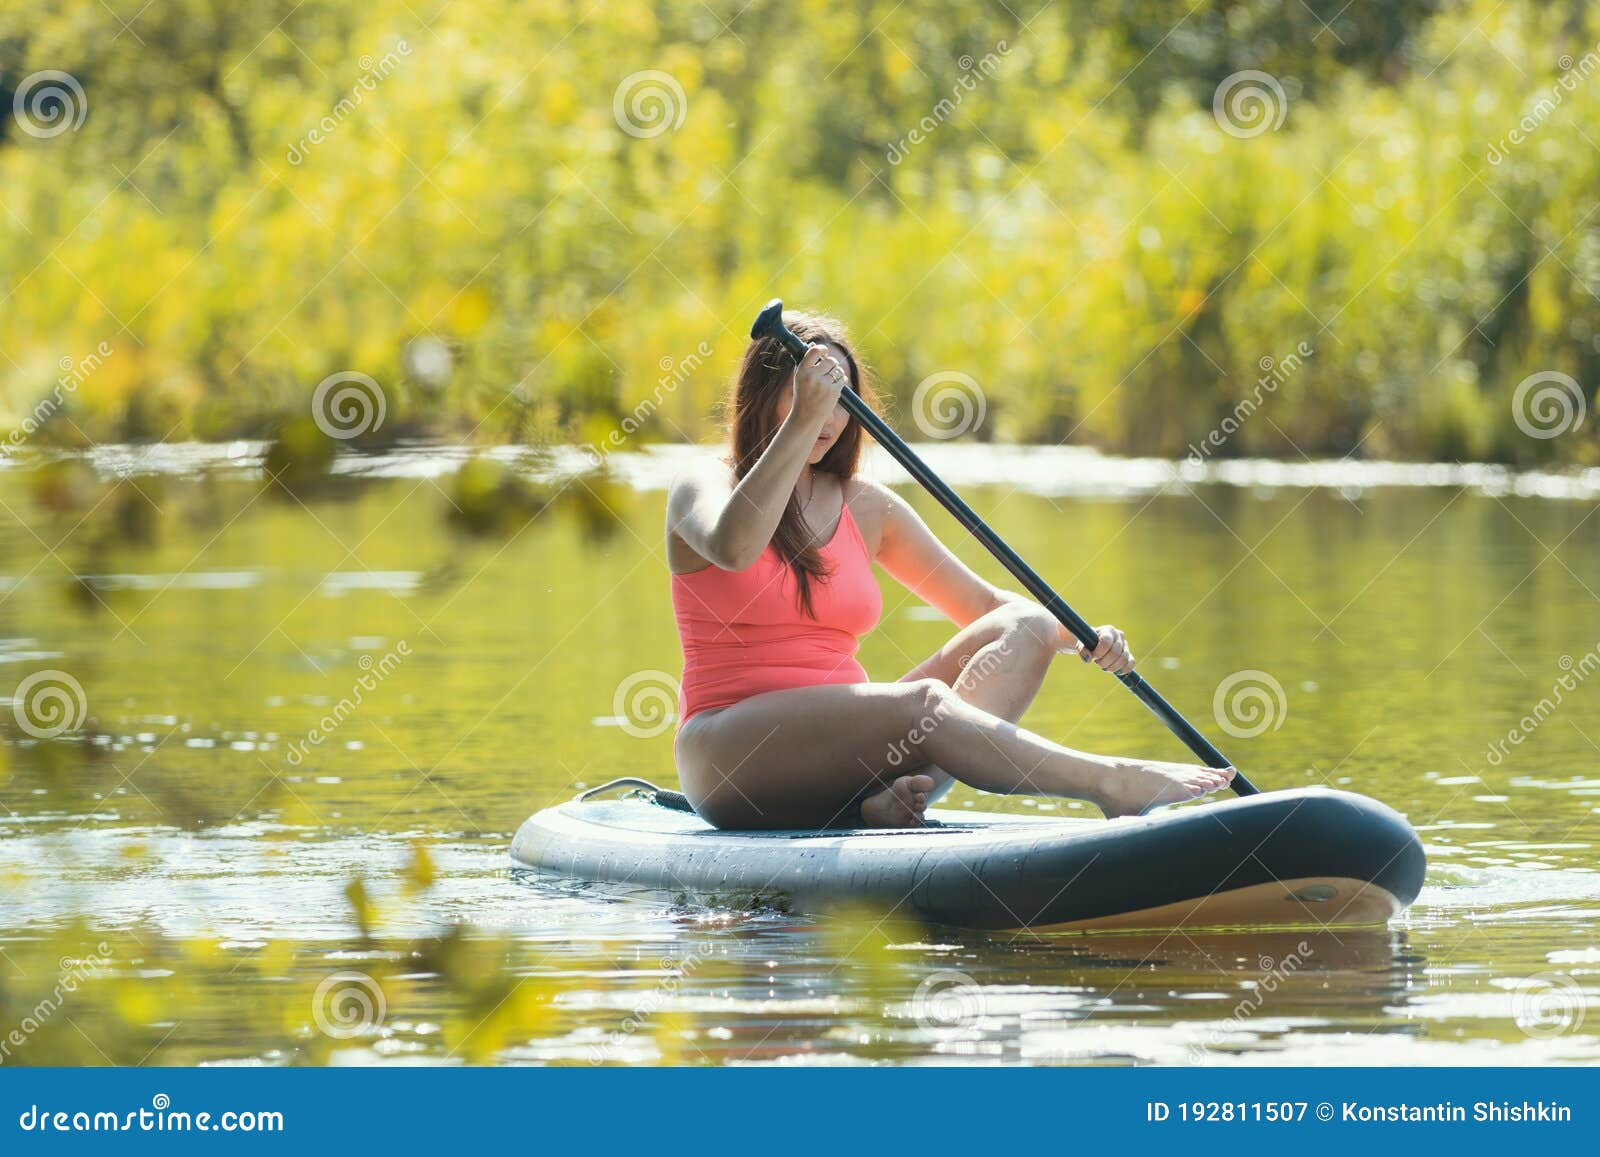 Young Woman in Pink Swimsuit Sailing on the Inflatable Boat with an Oar ...